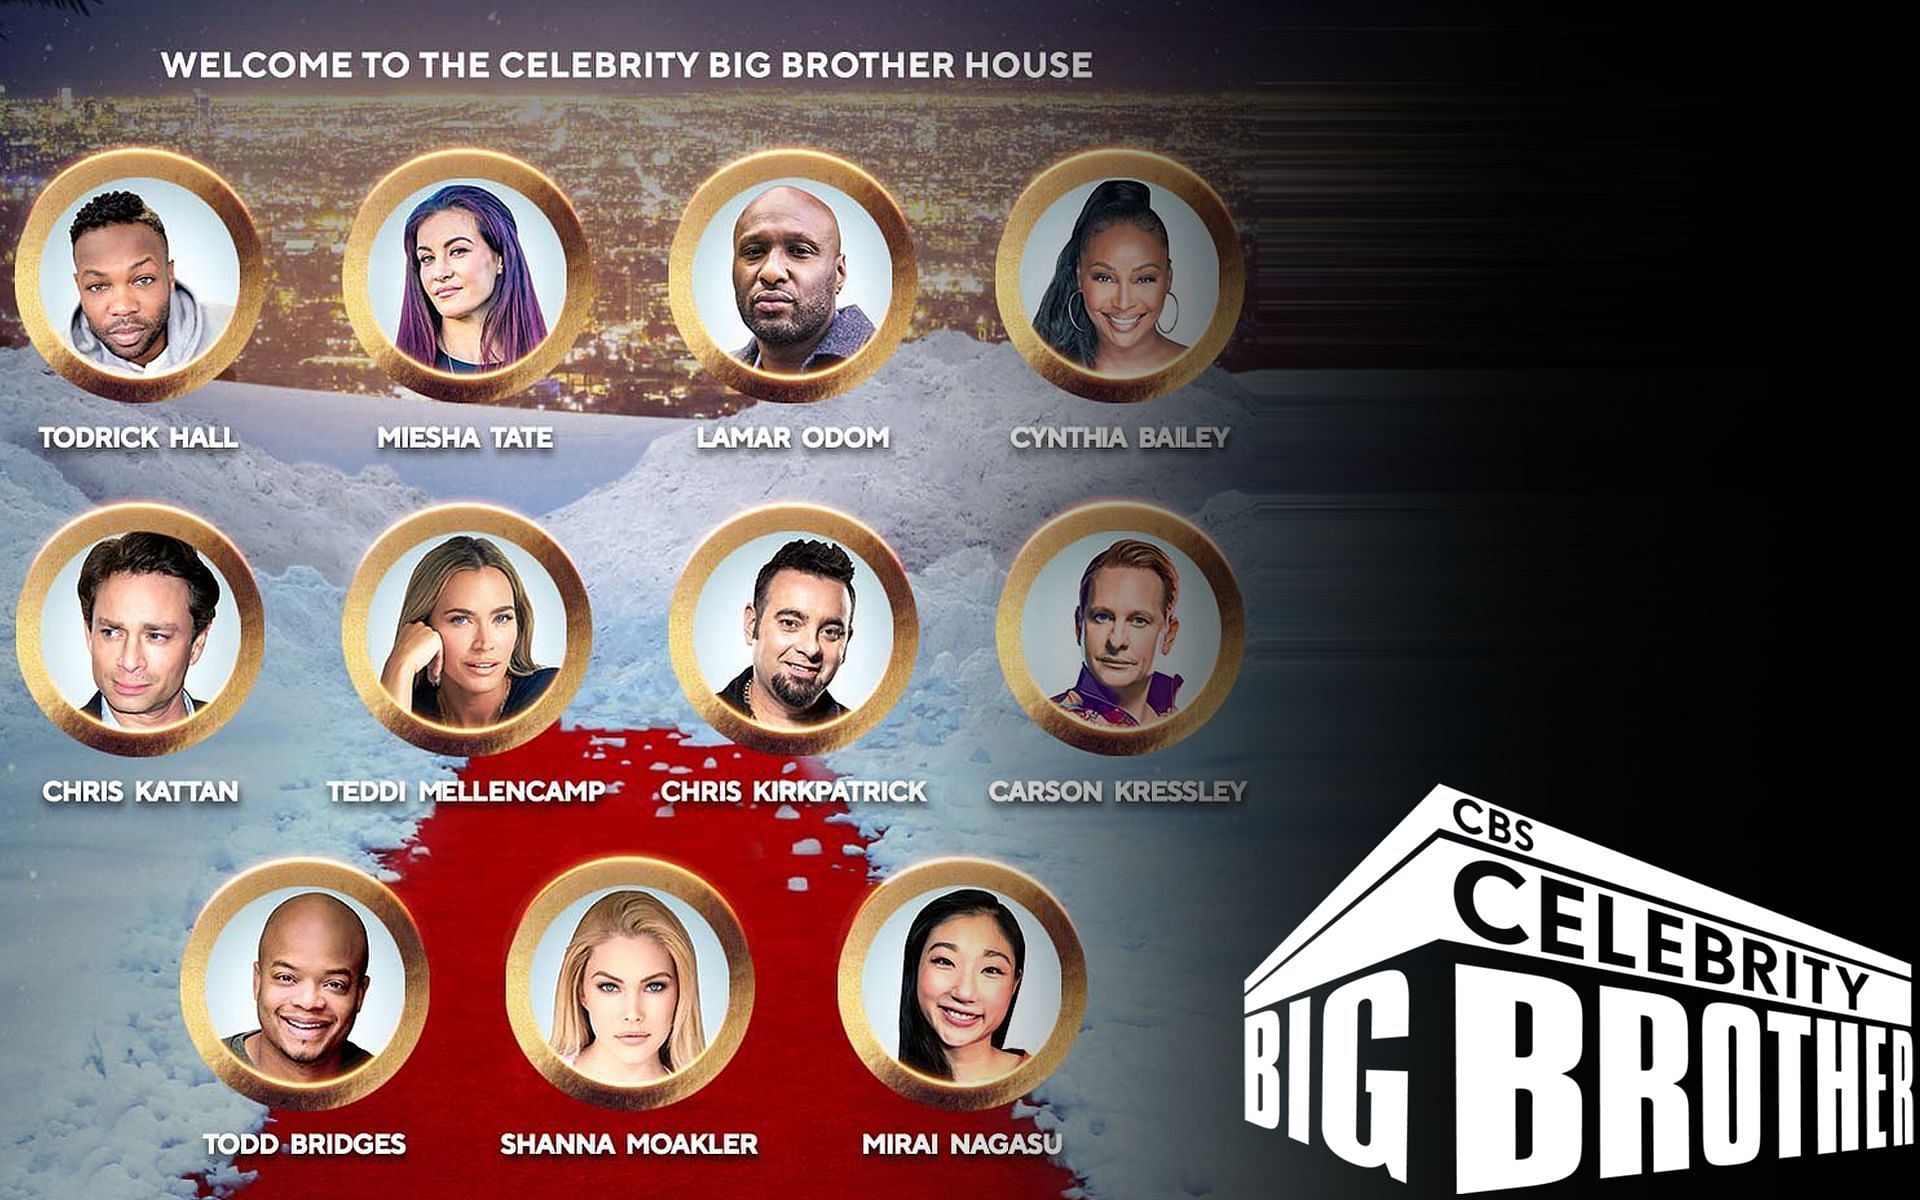 How to watch Celebrity Big Brother season 3 live feed on Paramount+